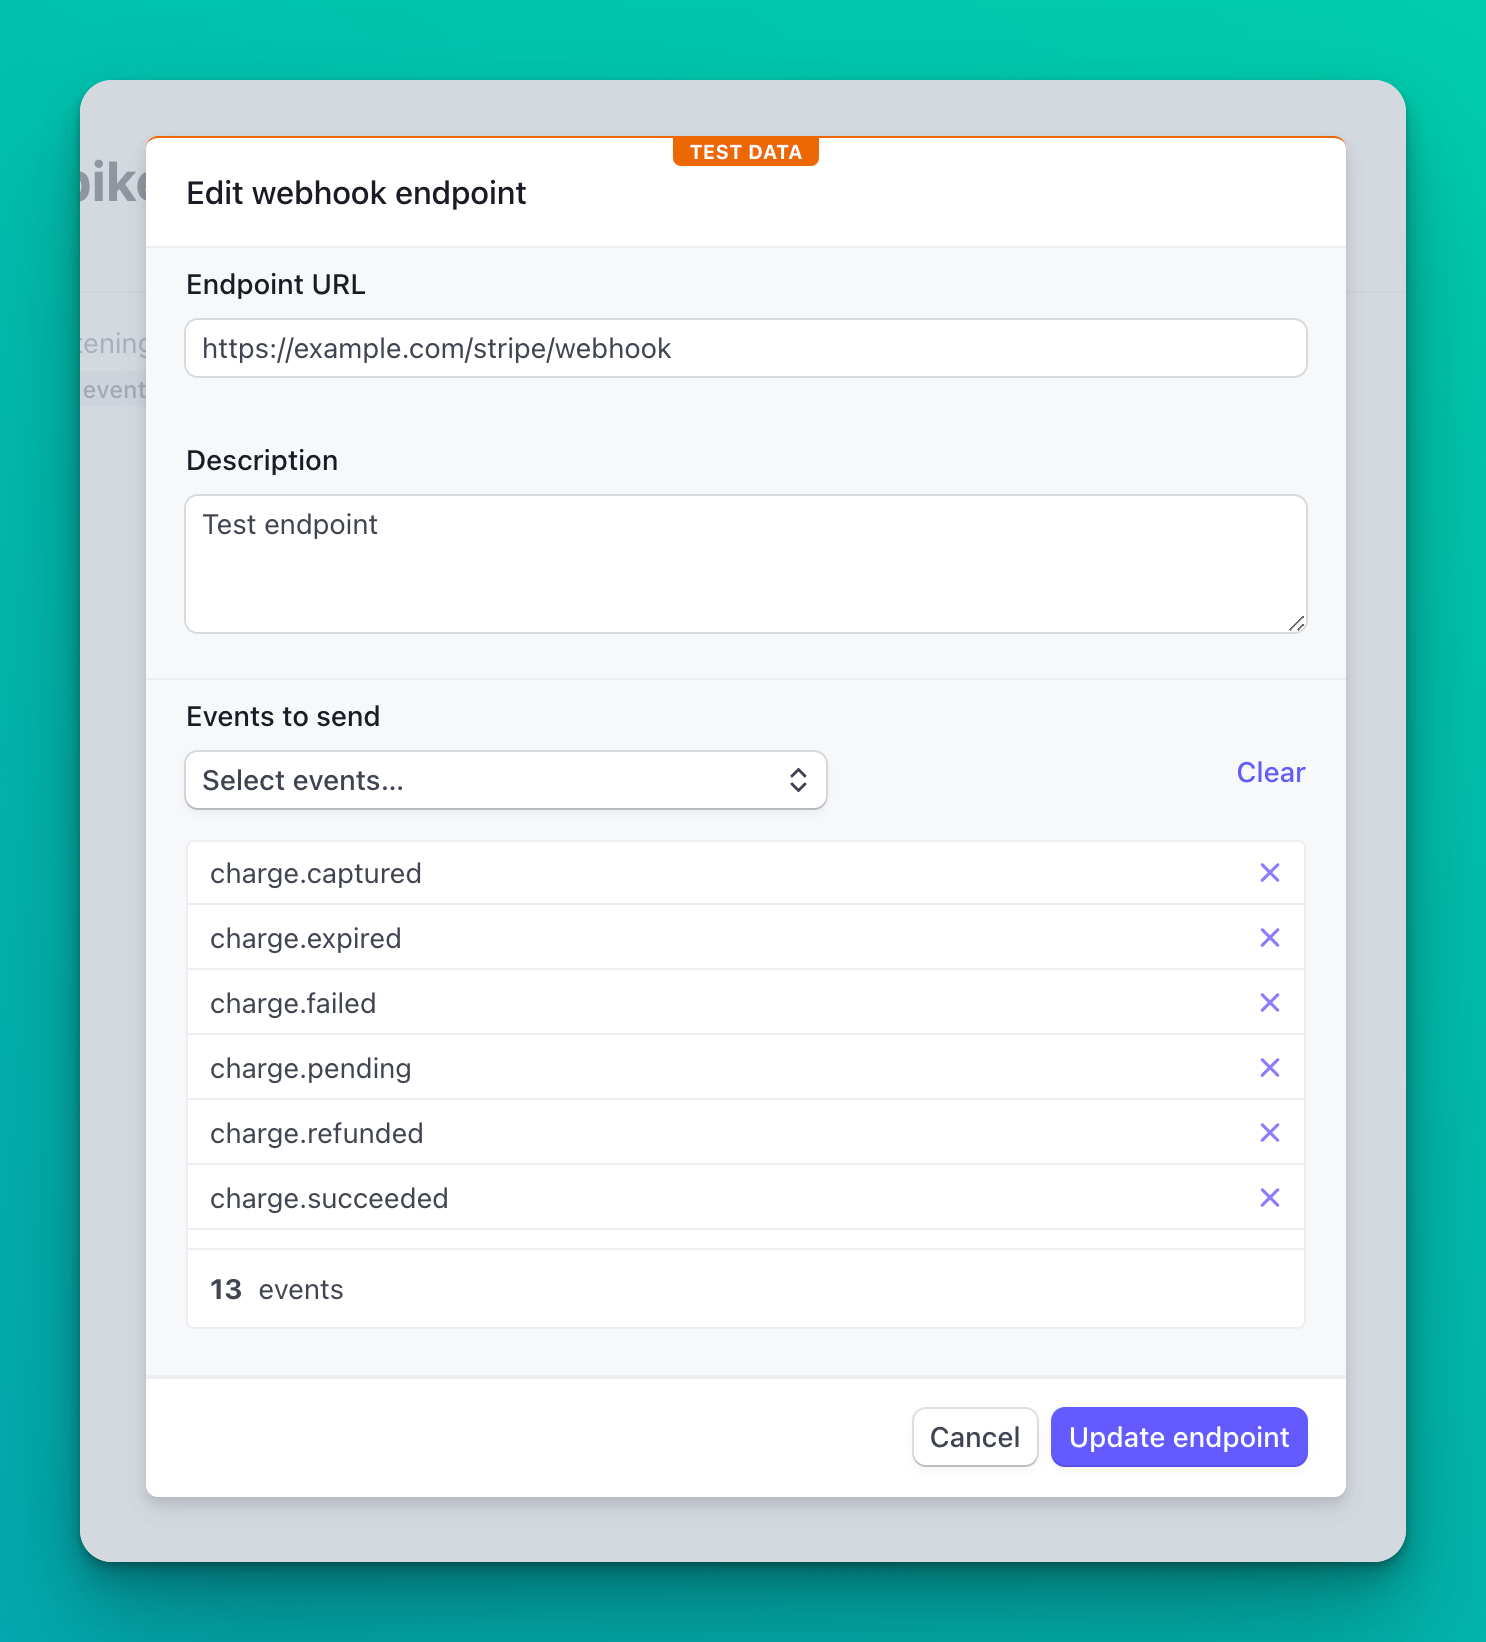 Image of a webhook editing modal in Stripe